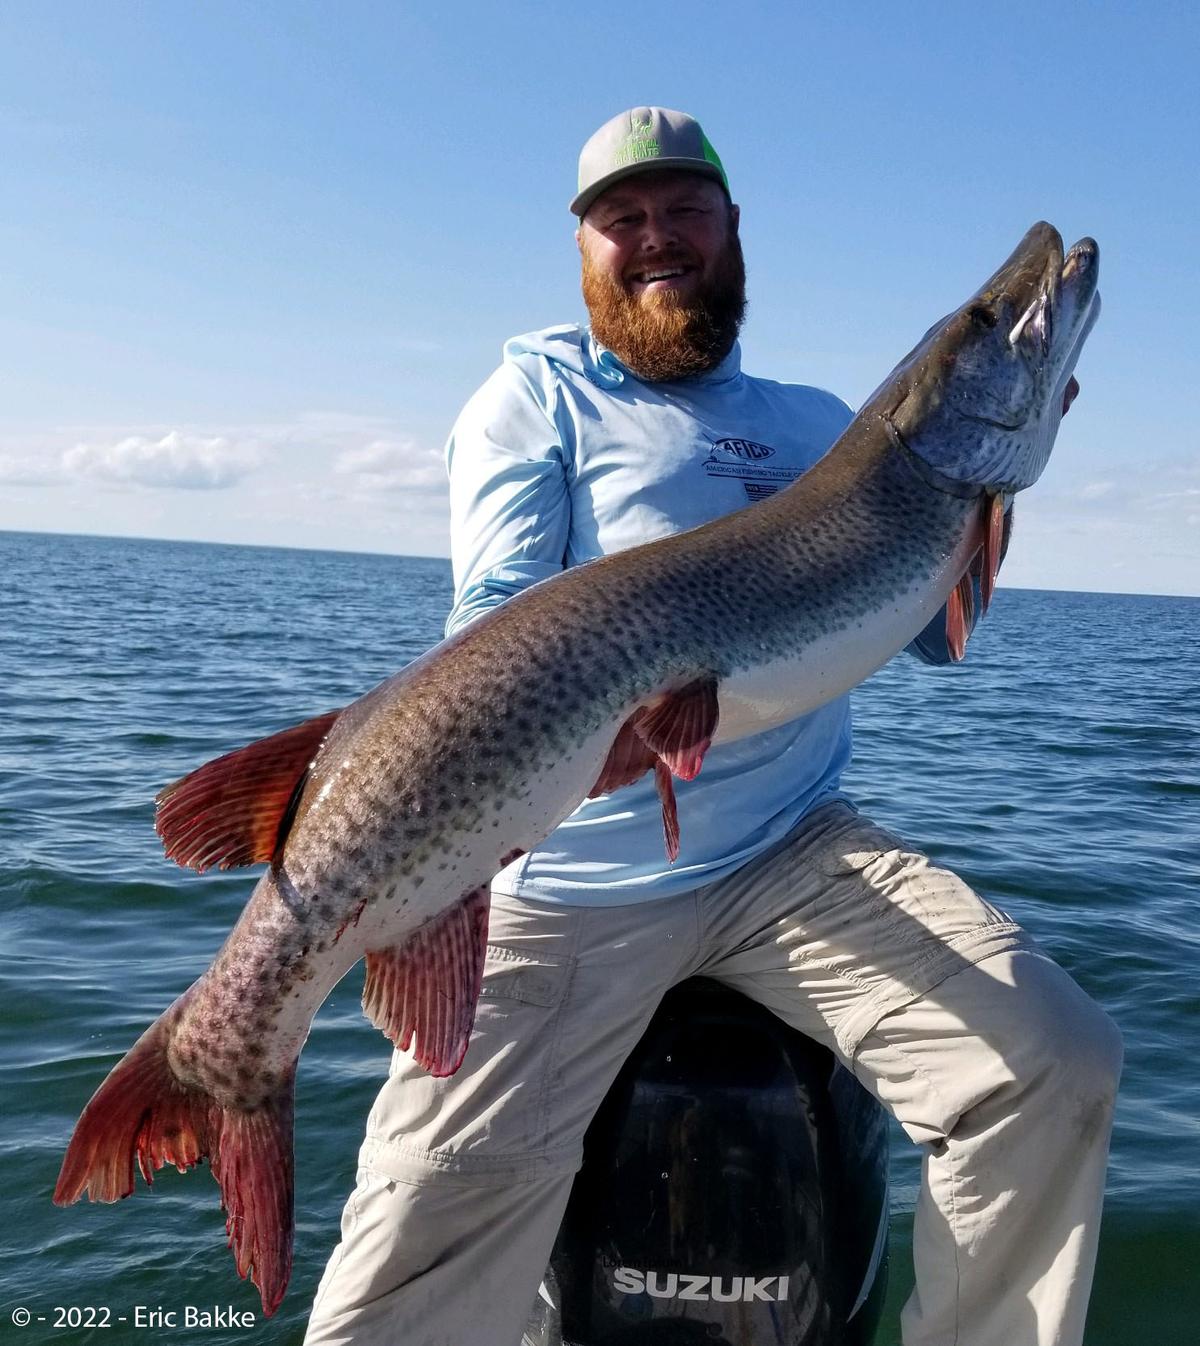 Eric Bakke poses proudly with his muskie before releasing it back into the lake. (Courtesy of Minnesota Department of Natural Resources)